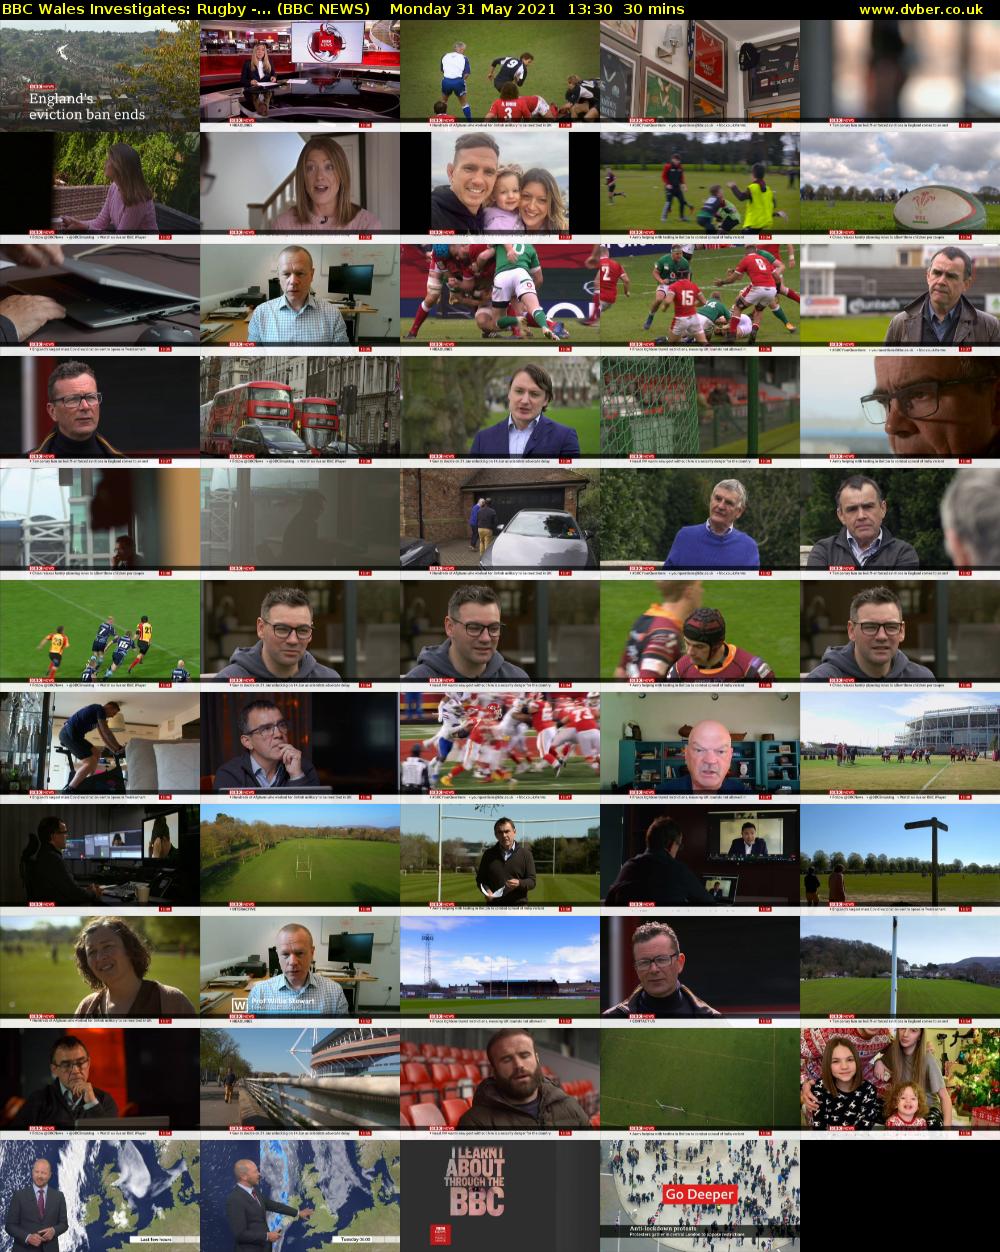 BBC Wales Investigates: Rugby -... (BBC NEWS) Monday 31 May 2021 13:30 - 14:00